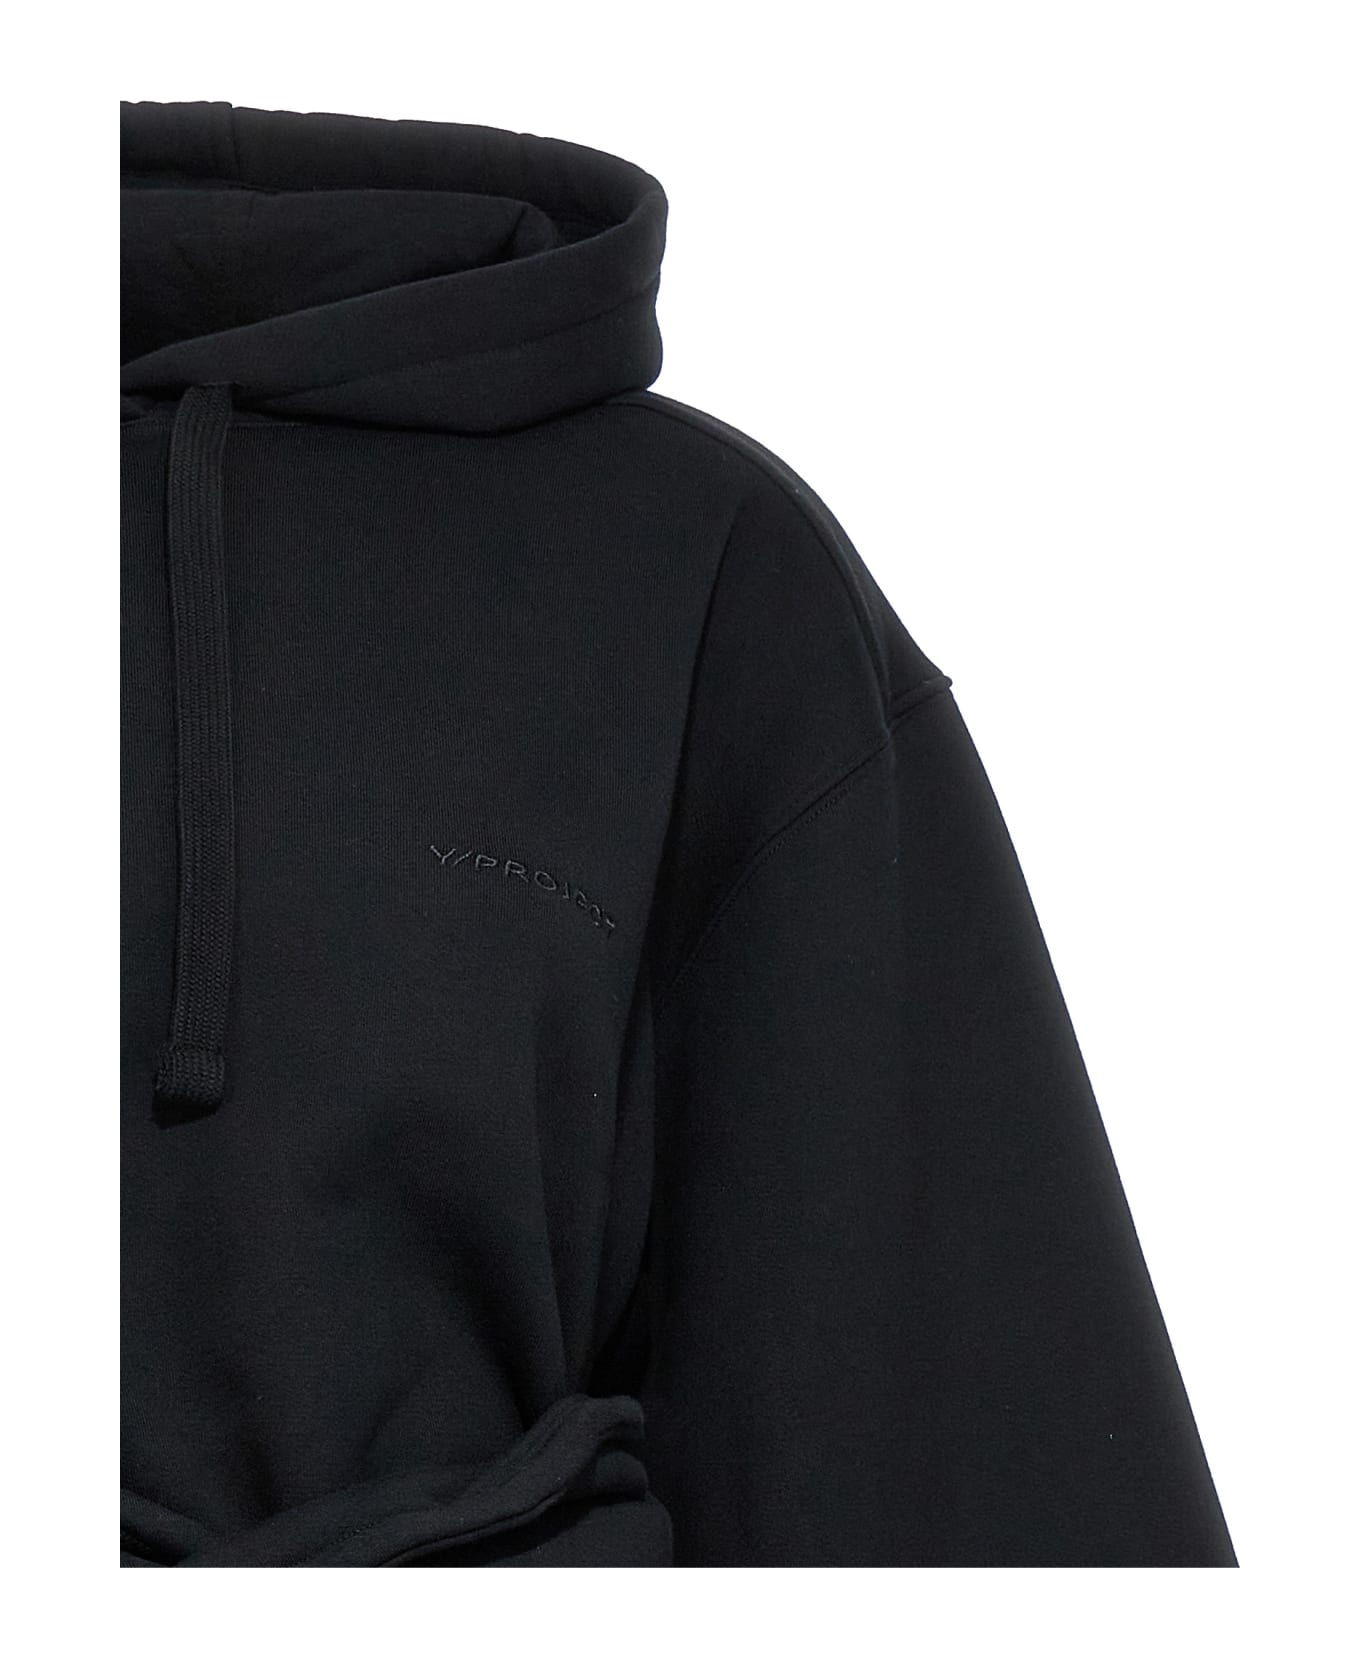 Y/Project 'wire Wrap' Hoodie - Black